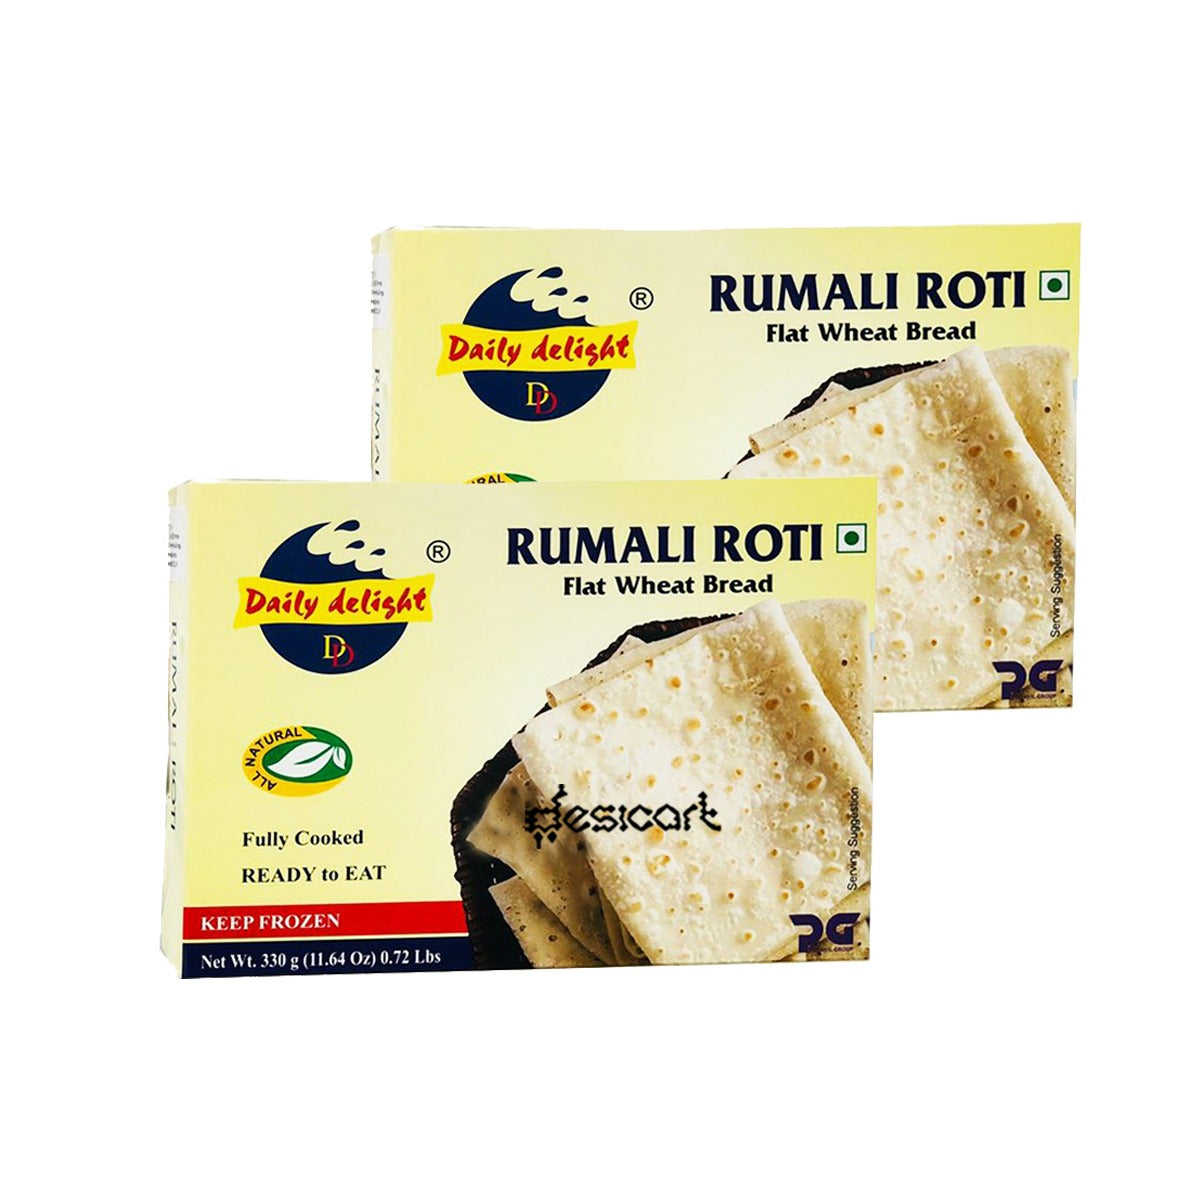 DAILY DELIGHT RUMALI ROTI 330G (PACK OF 2)